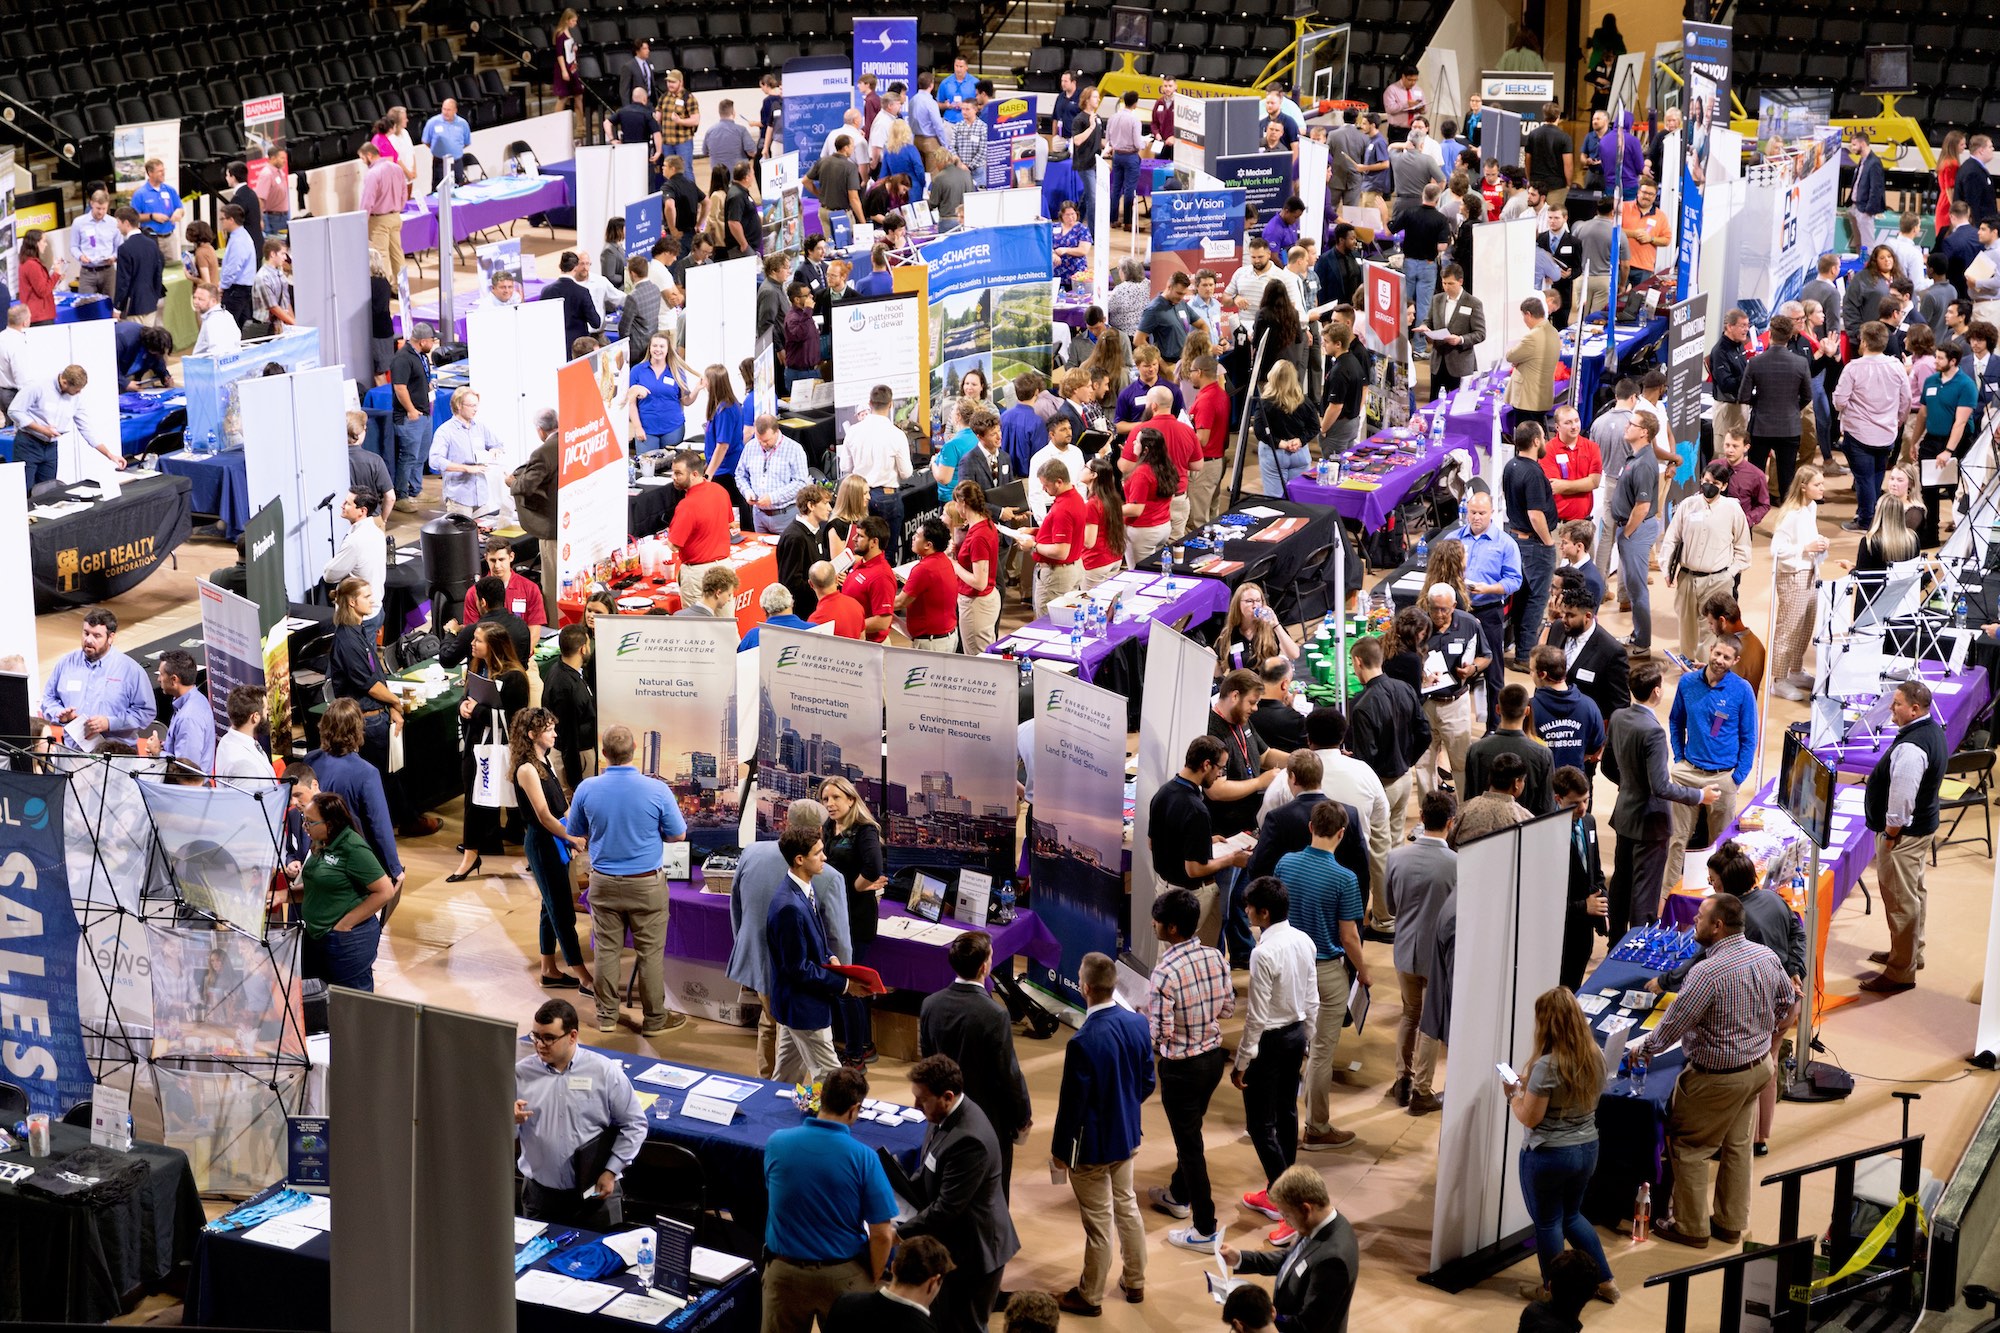 Students and employers interact at a past career fair hosted by Tech's Center for Career Development.